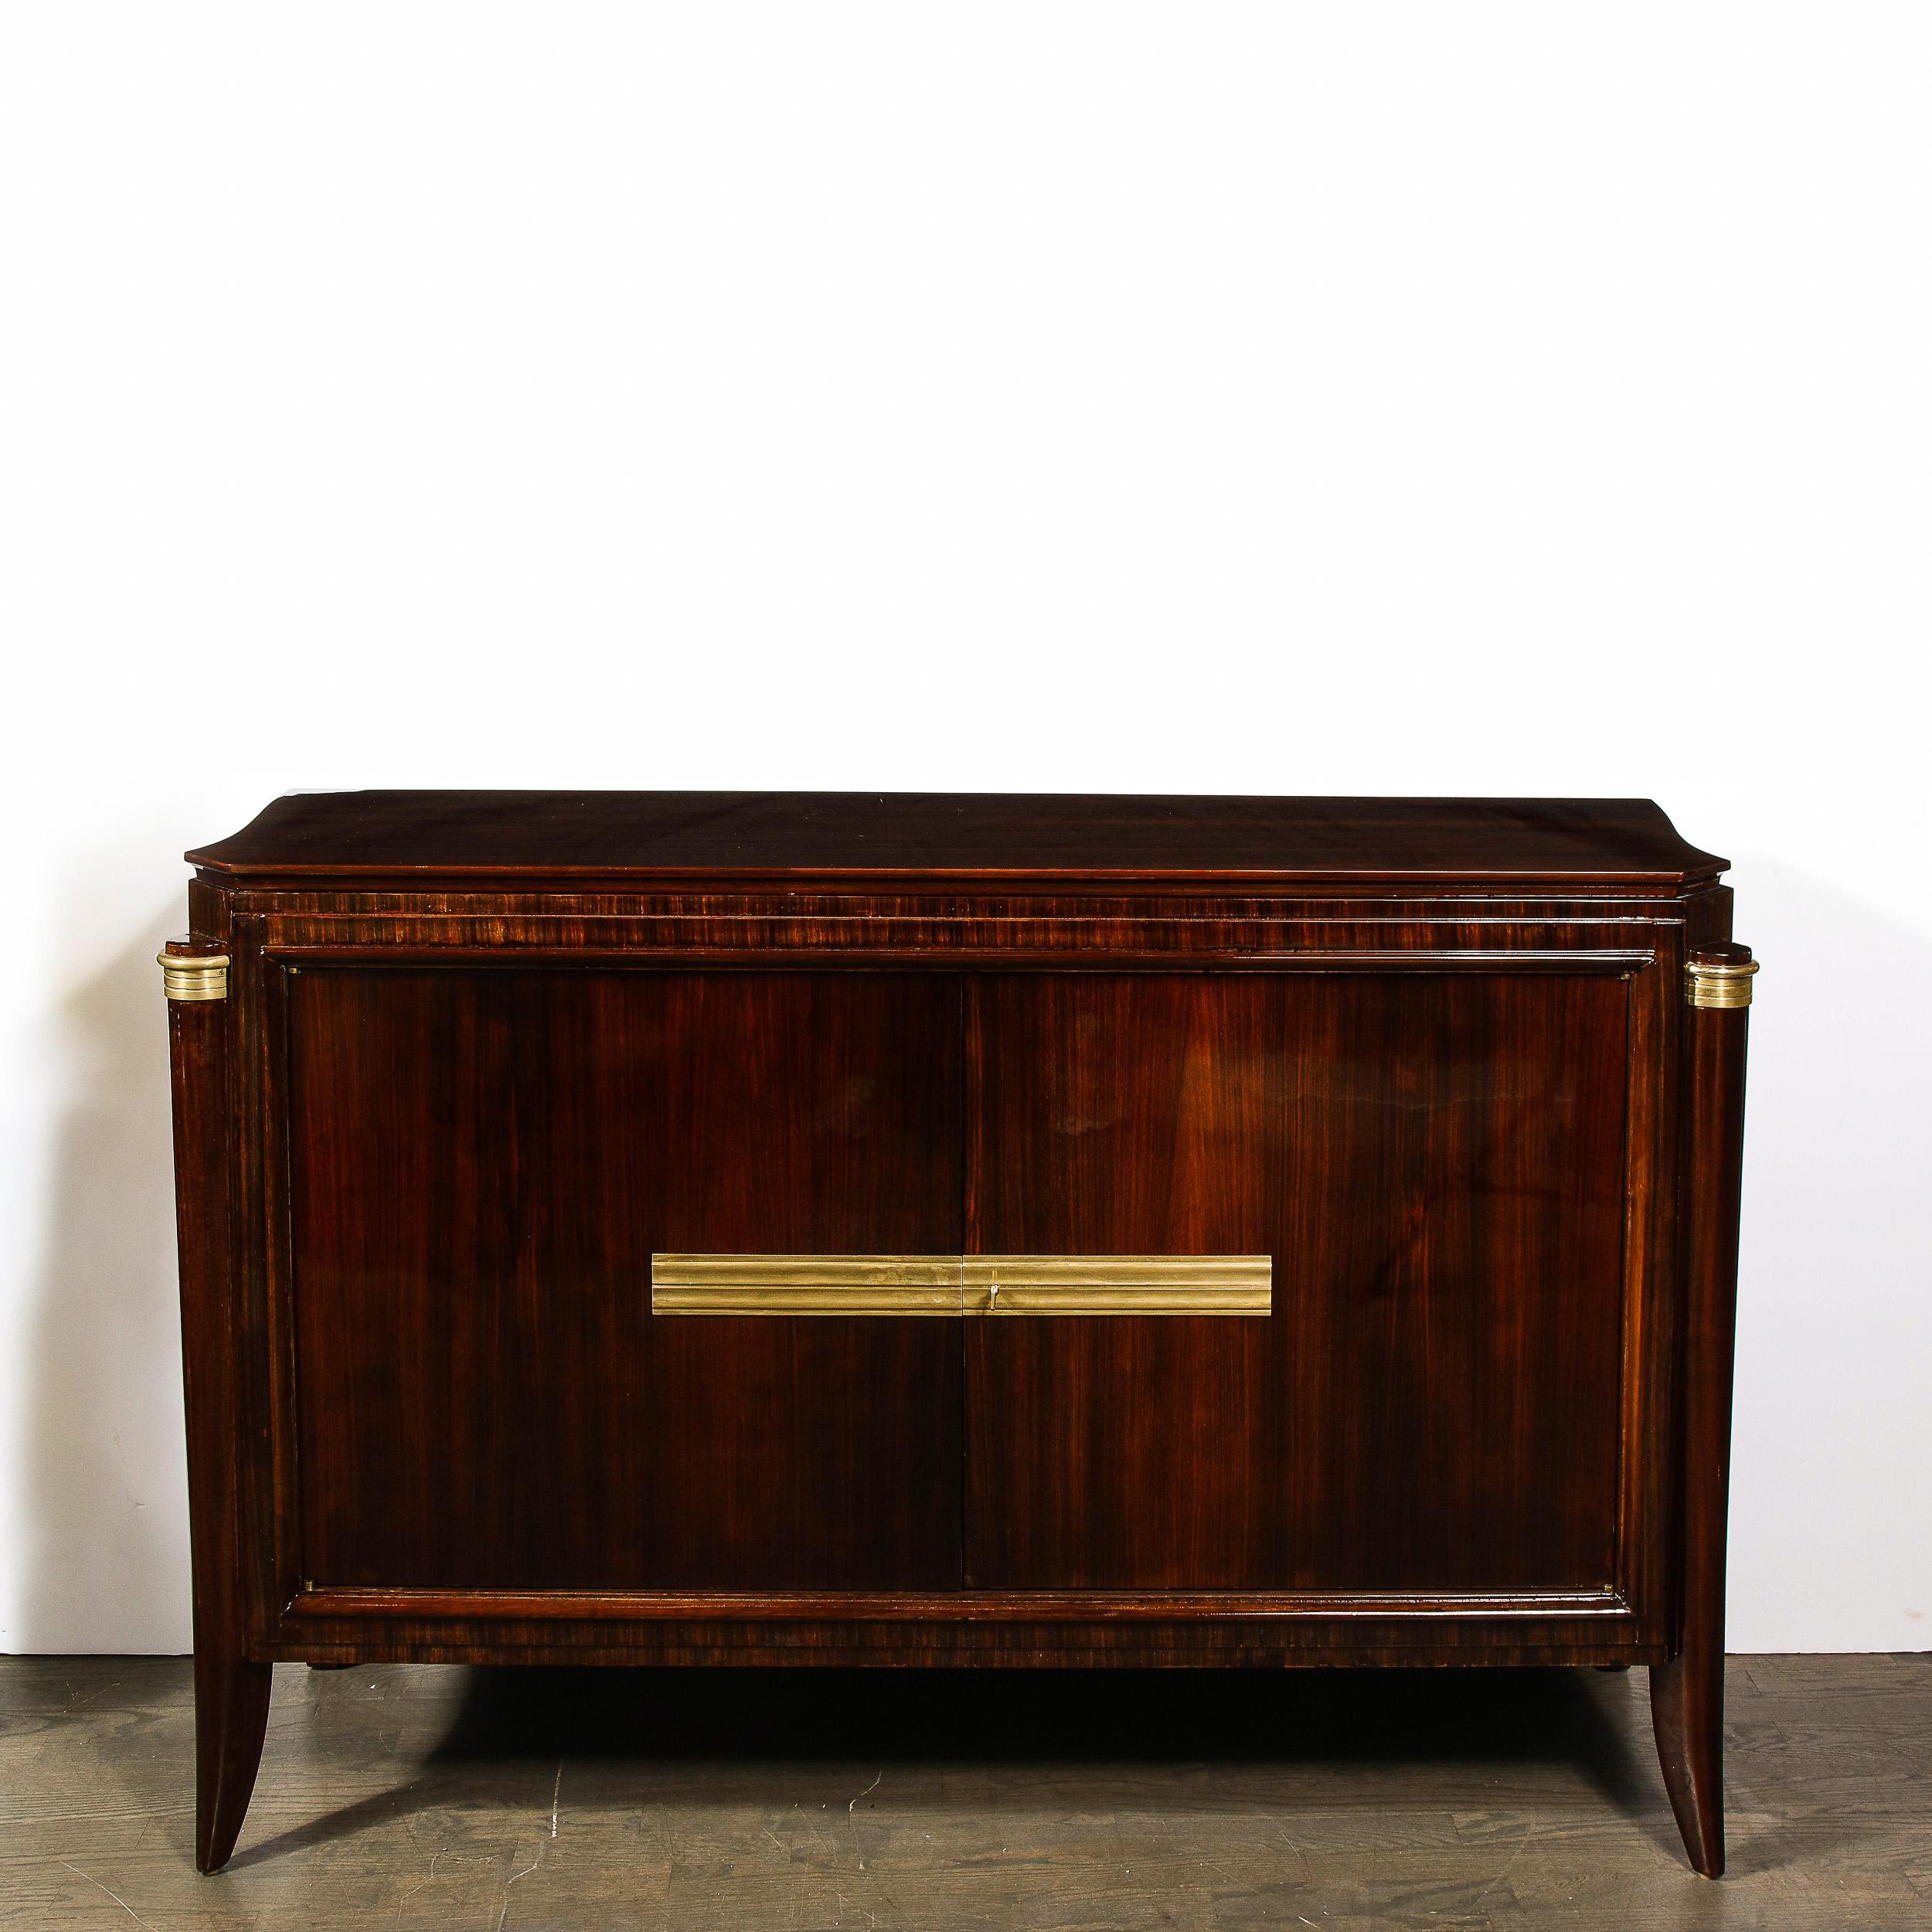 This elegant Art Deco Directoire style sideboard was realized in France, circa 1940. It features cabriolet legs capped with streamlined bronzed and a volumetric rectangular body in bookmatched walnut with a channeled bronzed placket complete with